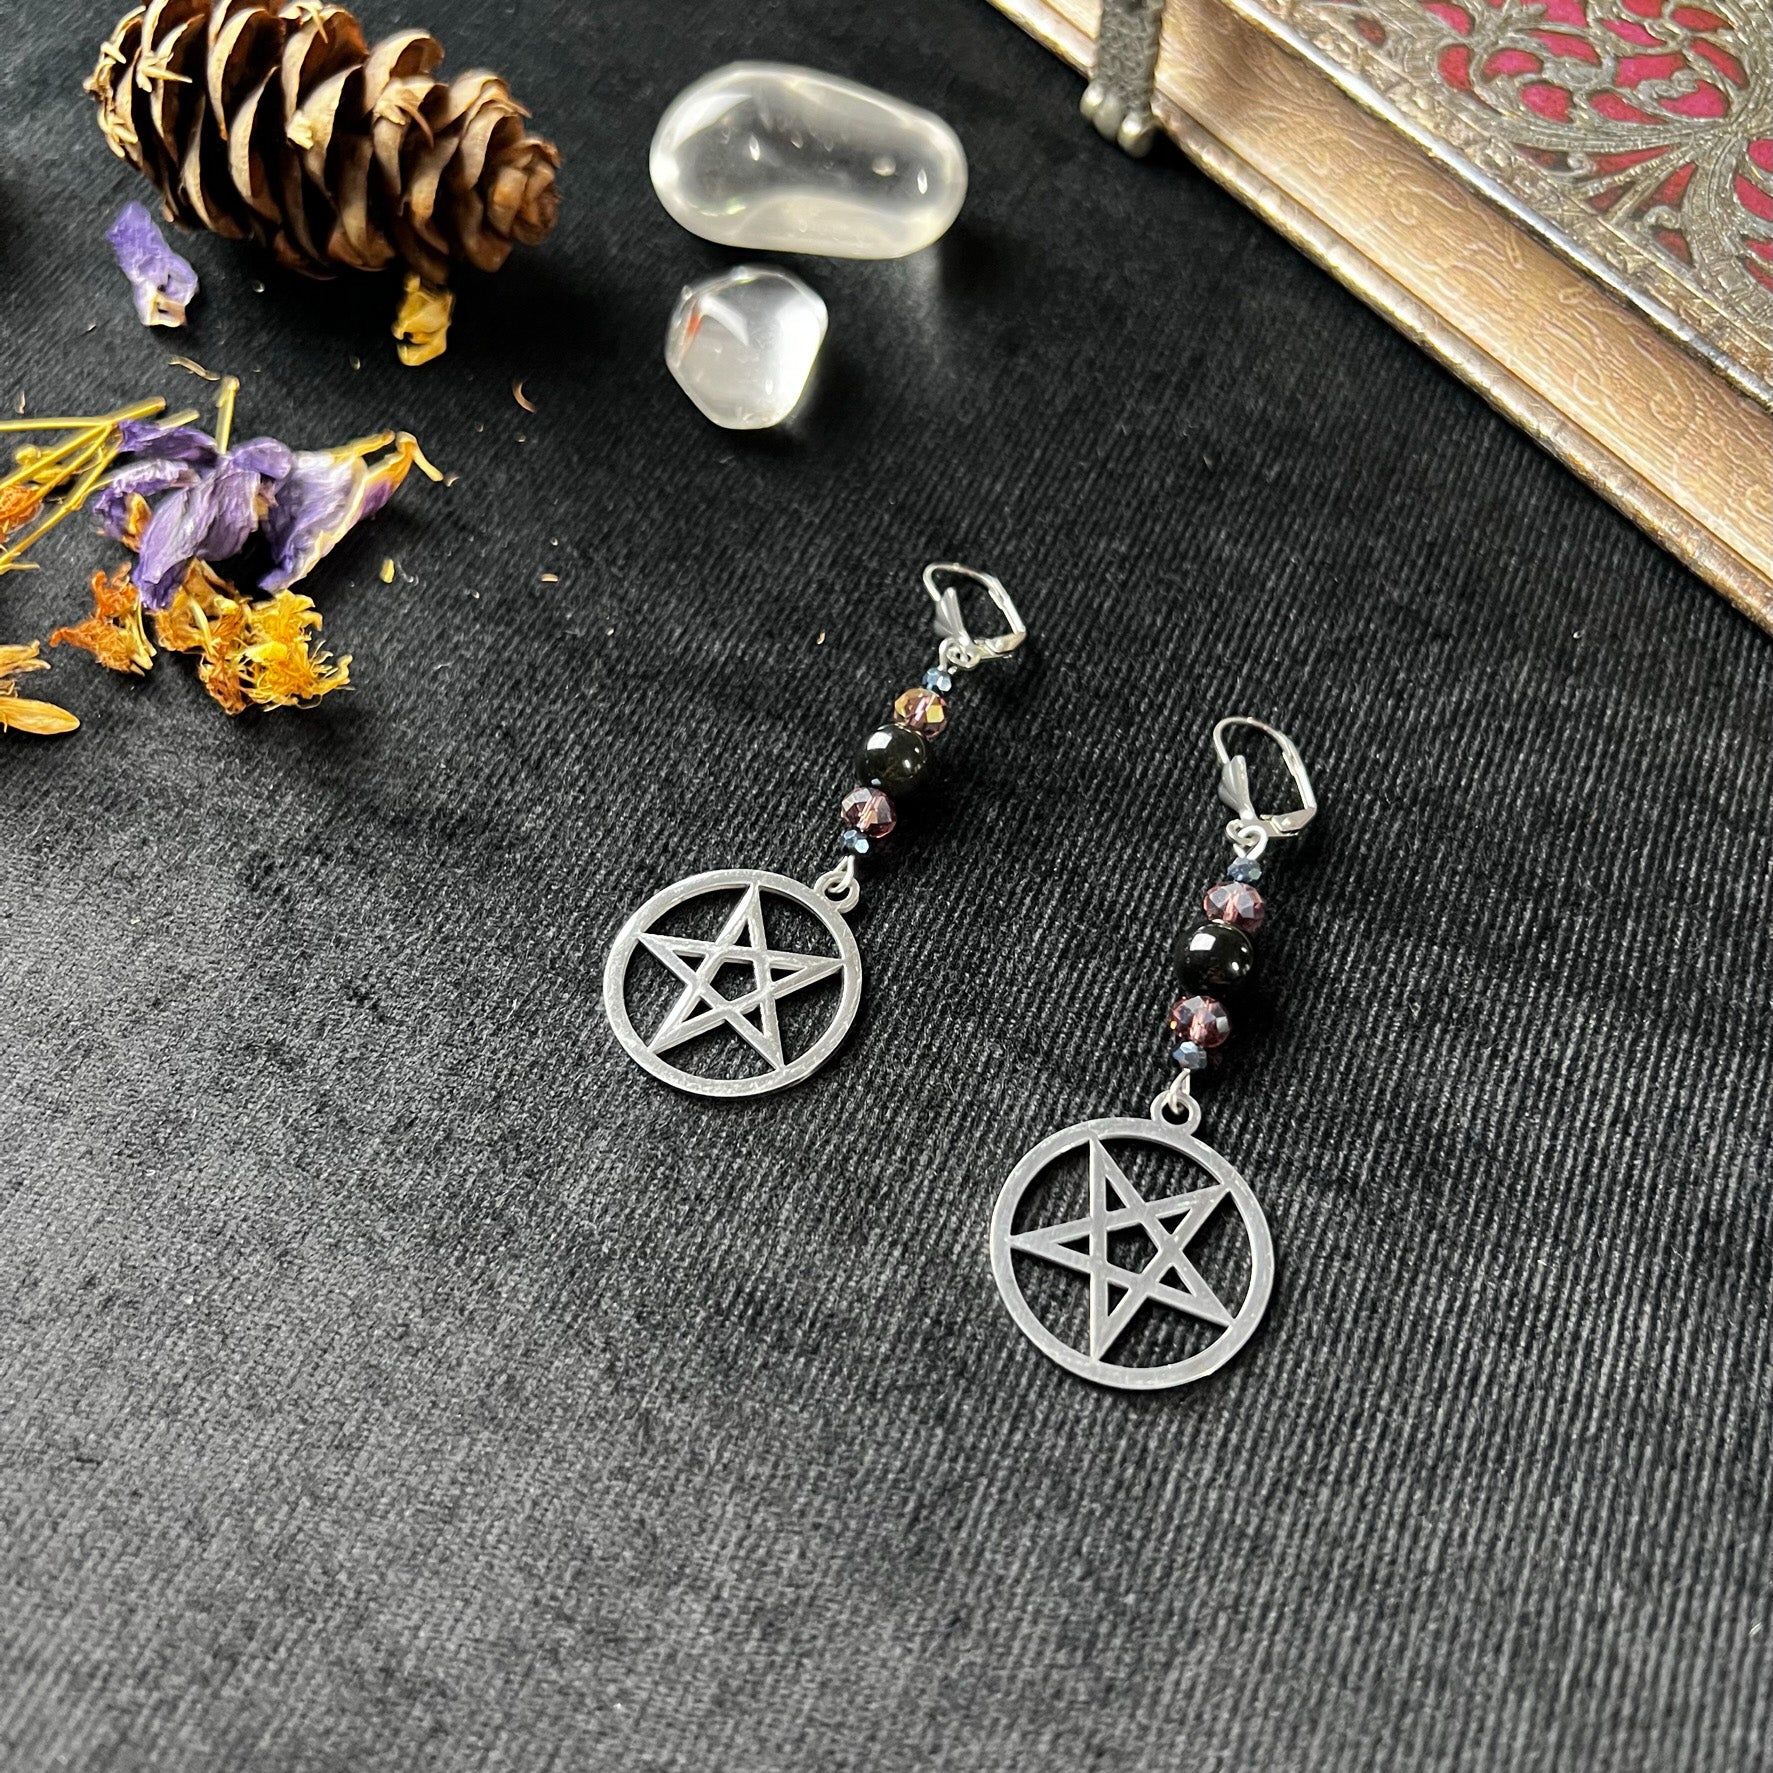 Inverted pentacle earrings made with stainless steel, obsidian and austrian crystal - The French Witch shop